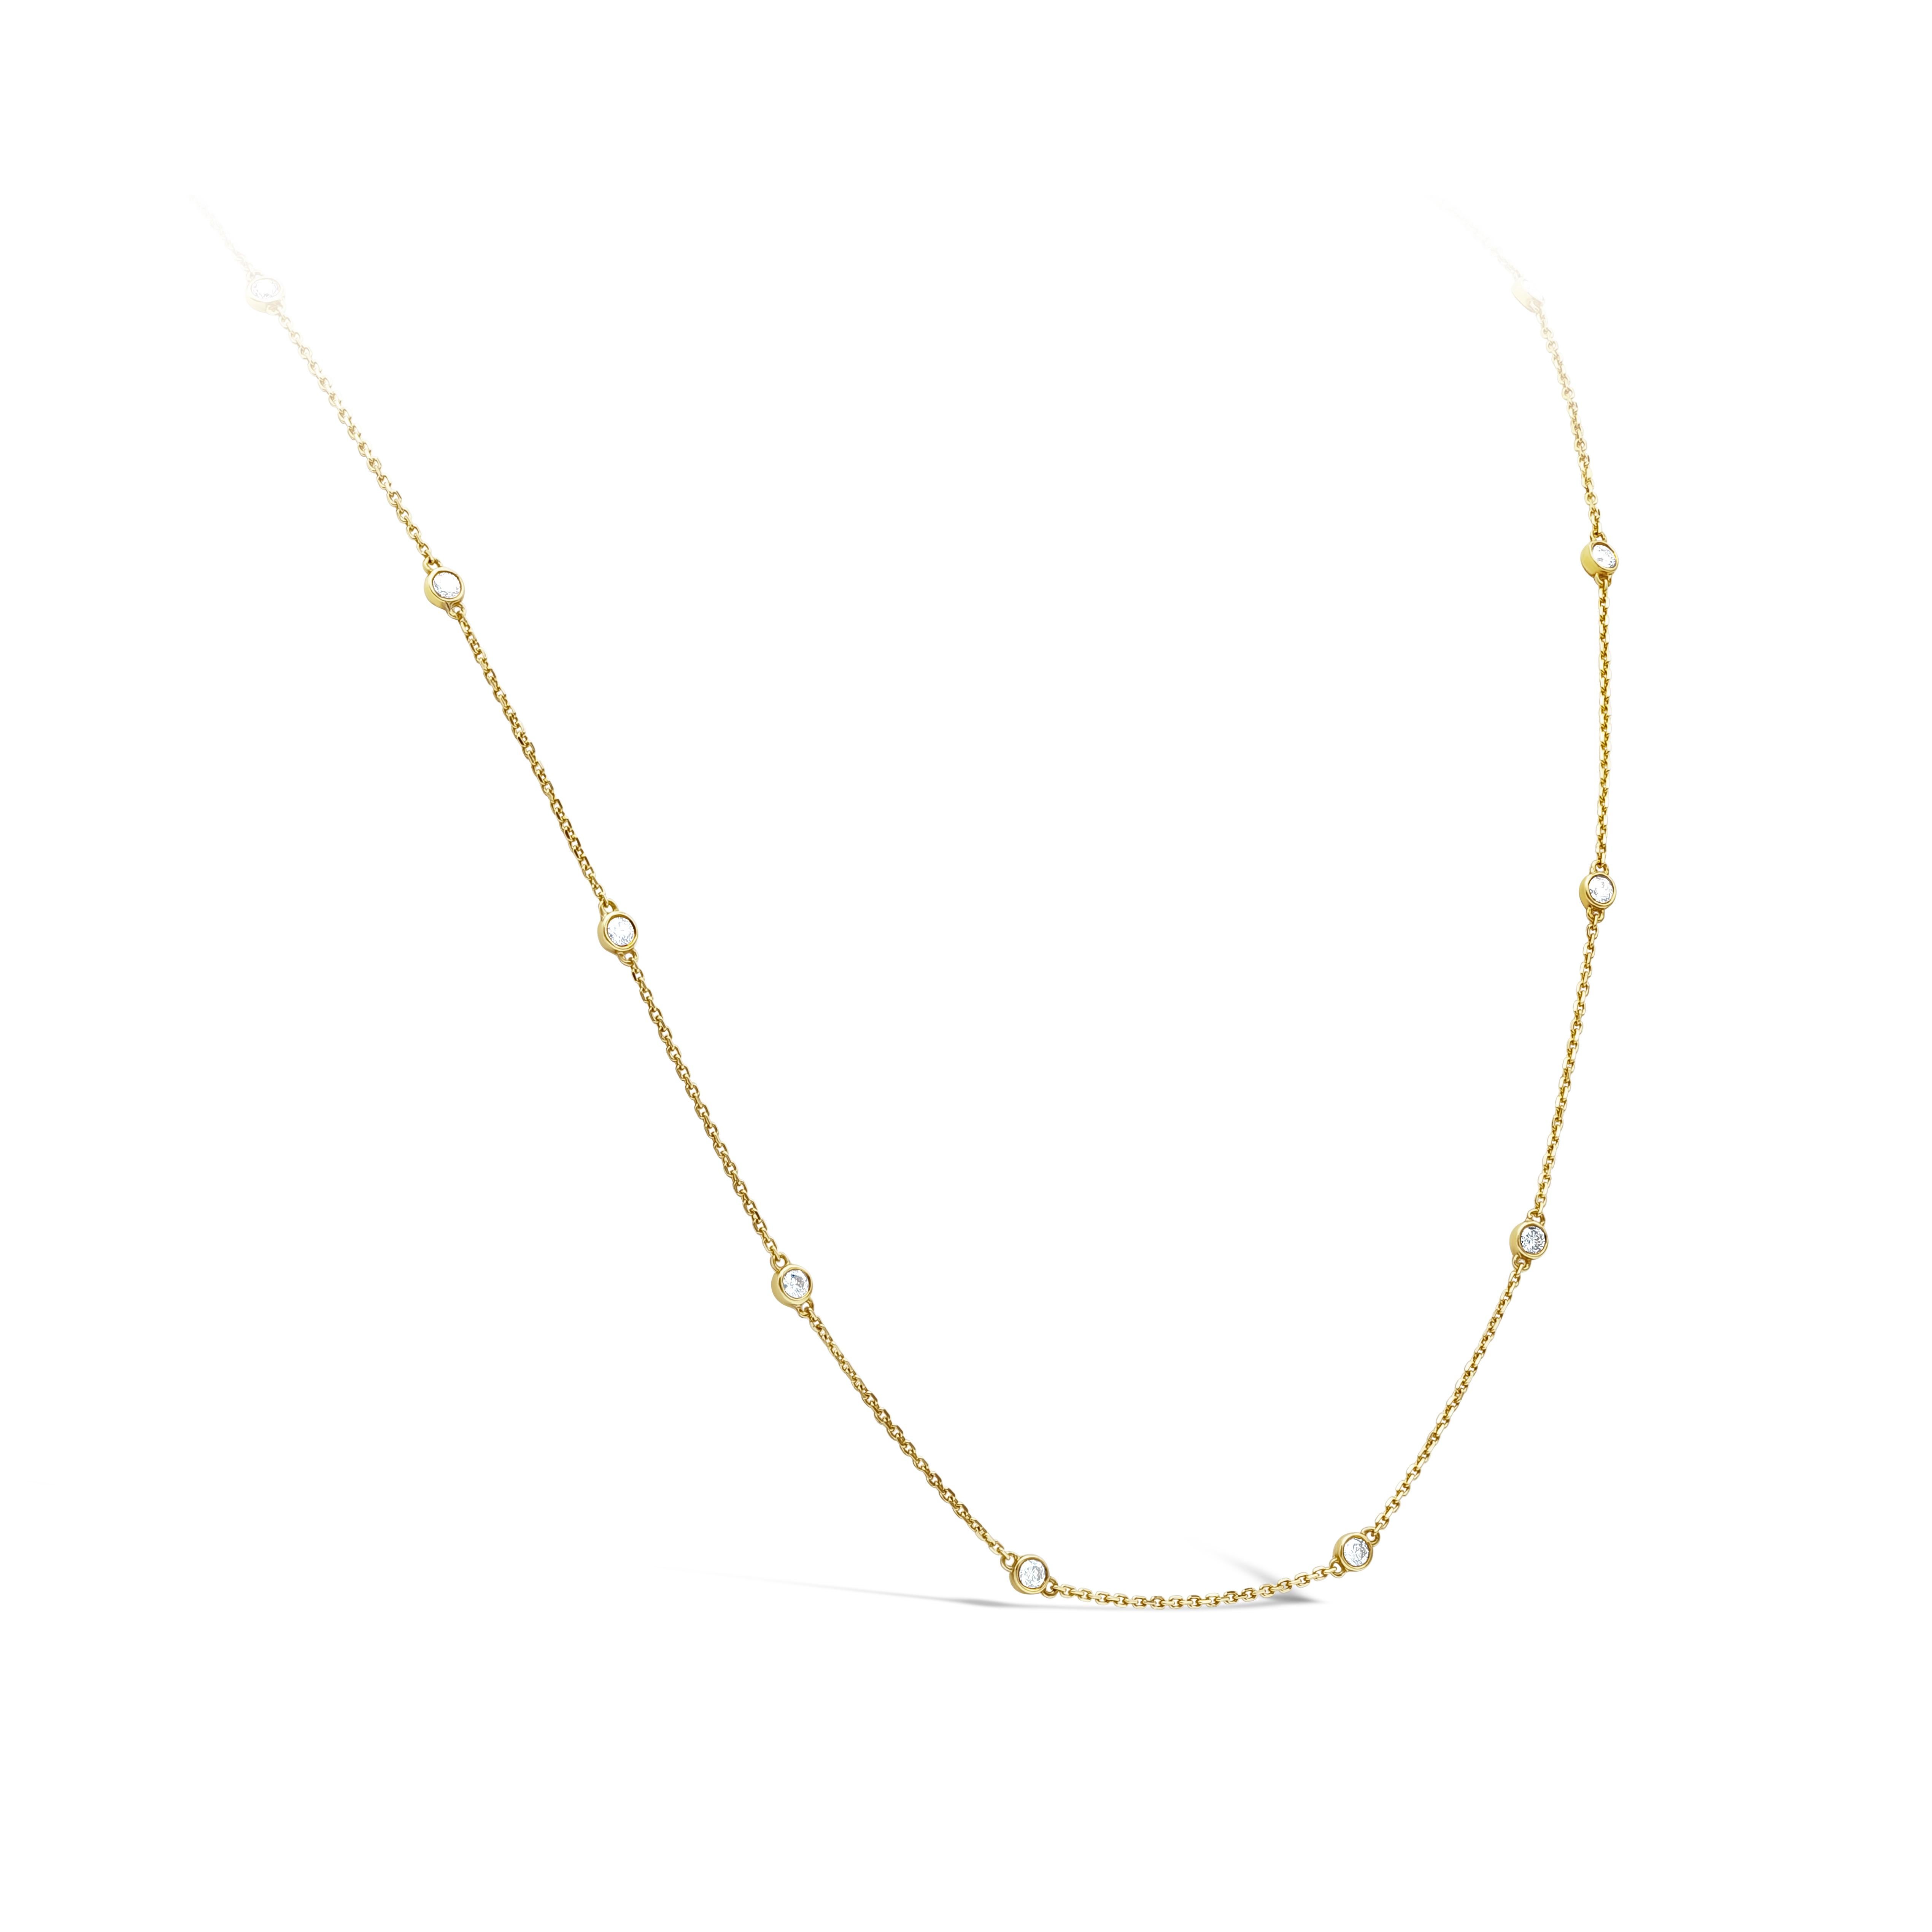 A simple yet classic necklace that packs a lot of sparkle; a line of brilliant diamonds bezel set in 18k yellow gold are perfectly spaced for that delicate and feminine look and finish. Diamonds weigh 1.70 carats total. Approximately 18 inches in